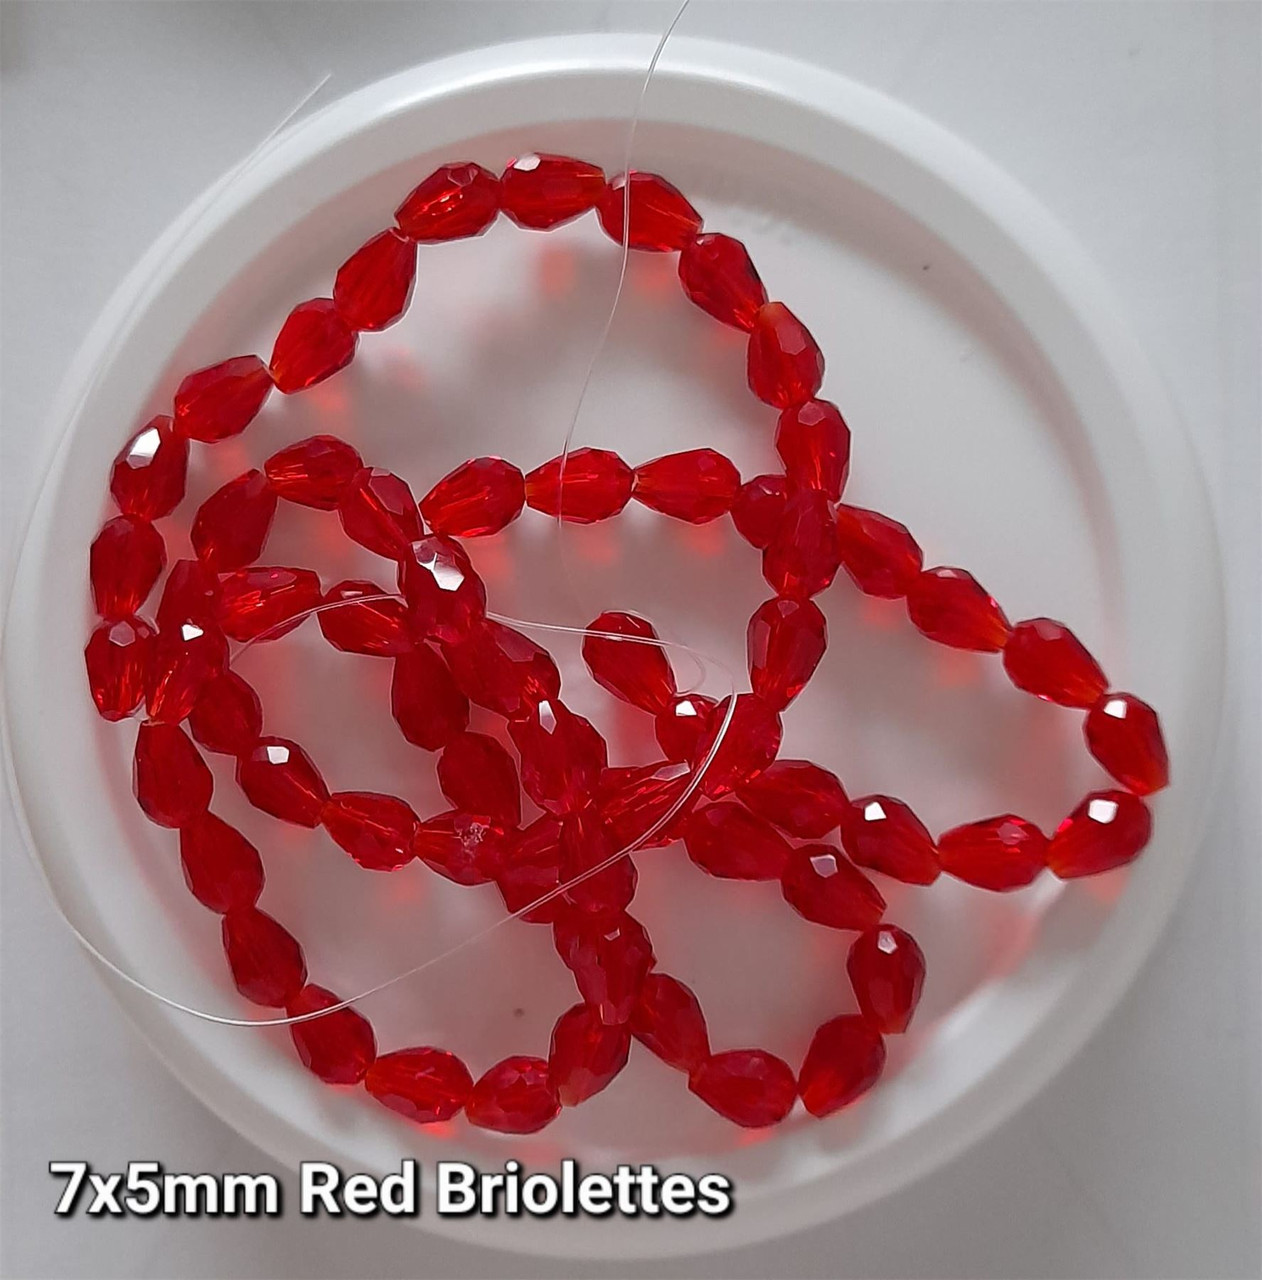 Strand of faceted drop glass beads (briolettes) - approx 7x5mm, Red, approx 70 beads